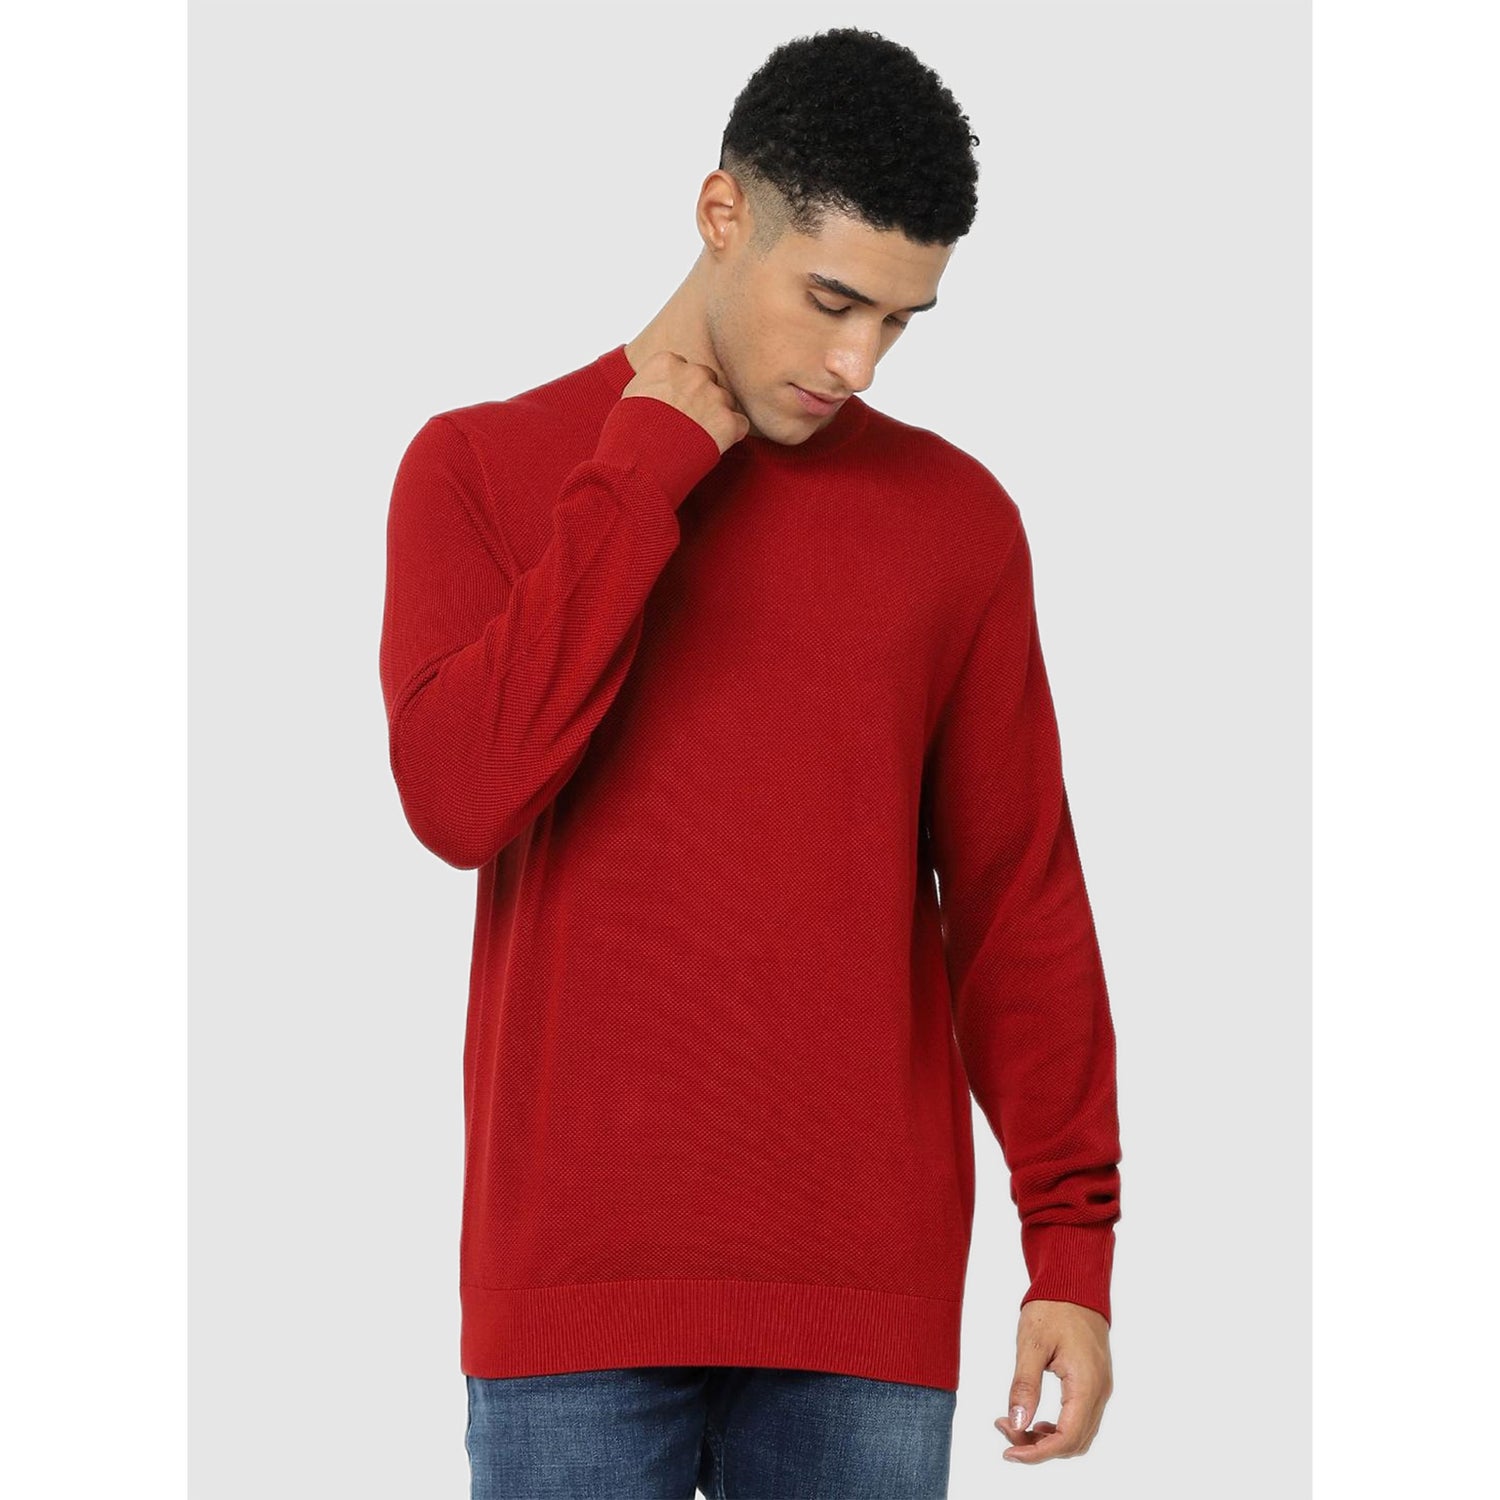 Red Solid Regular Fit Pullover Sweater (CEPICIN)